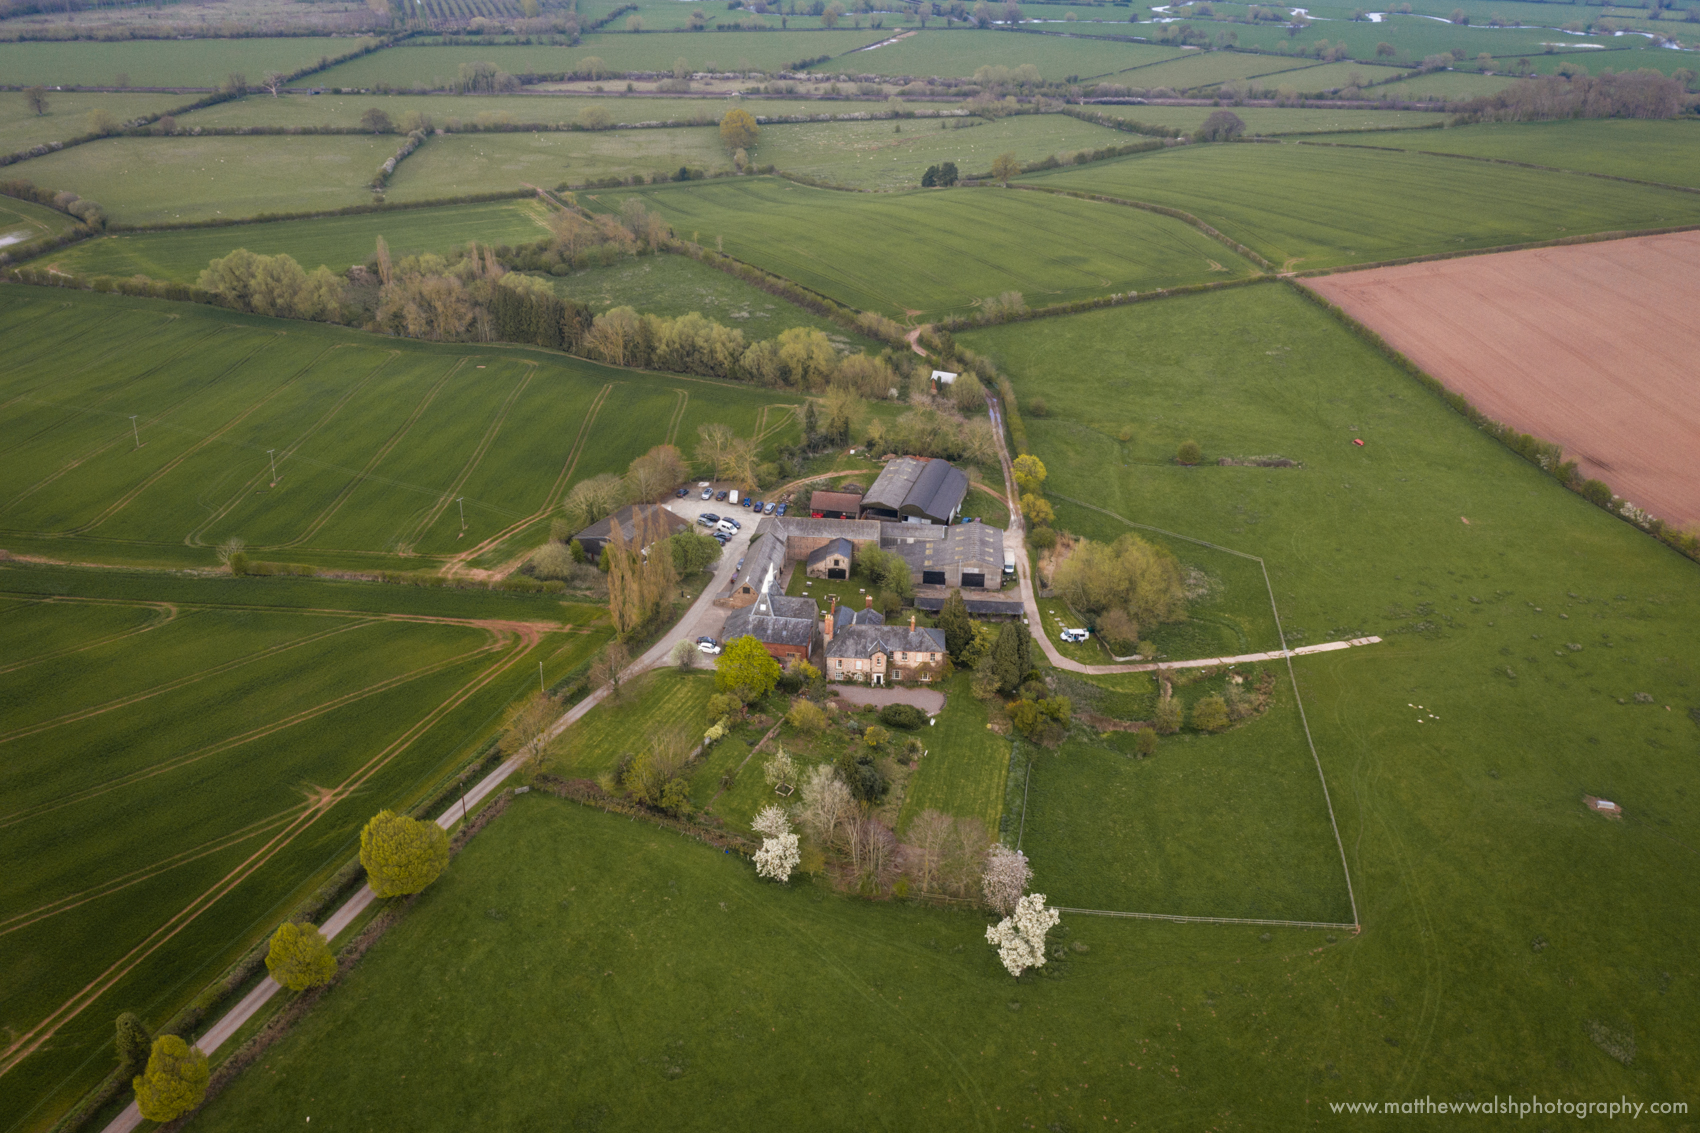 A closing shot of Lyde Court taken from the air